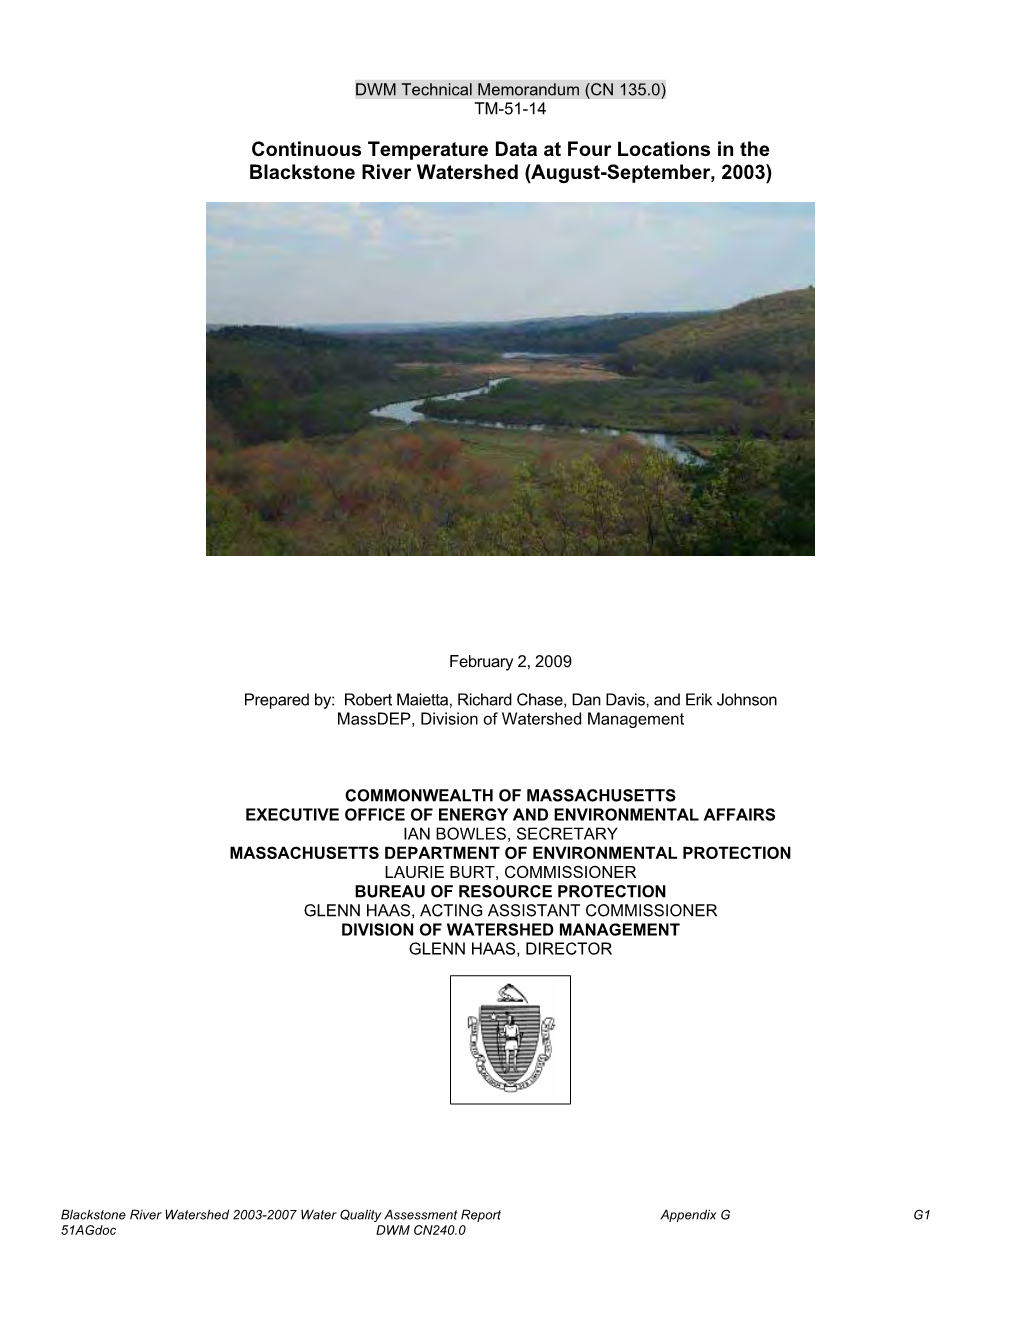 Continuous Temperature Data at Four Locations in the Blackstone River Watershed (August-September, 2003)